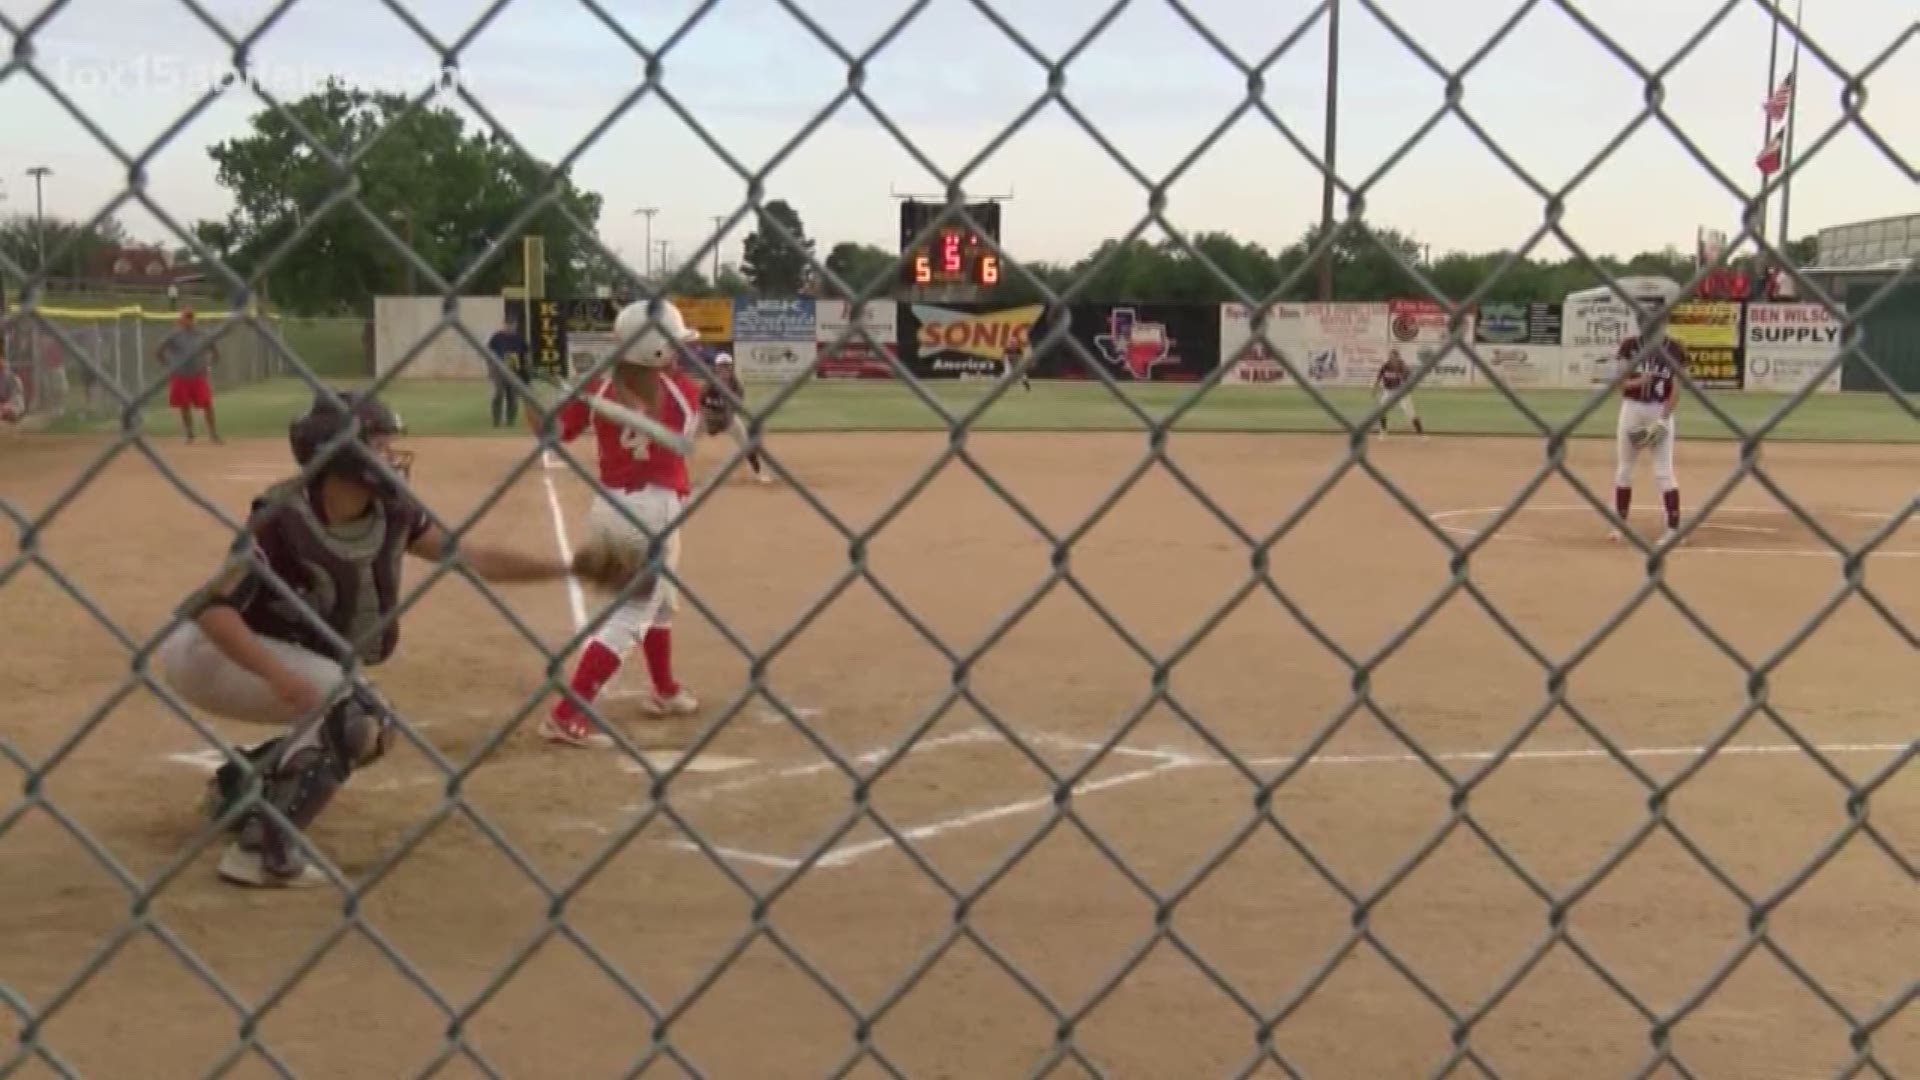 A tough series against Ralls pushed the Lady Lions to play some of their best softball. This type of a moment could end up helping Albany deeper into the playoffs.